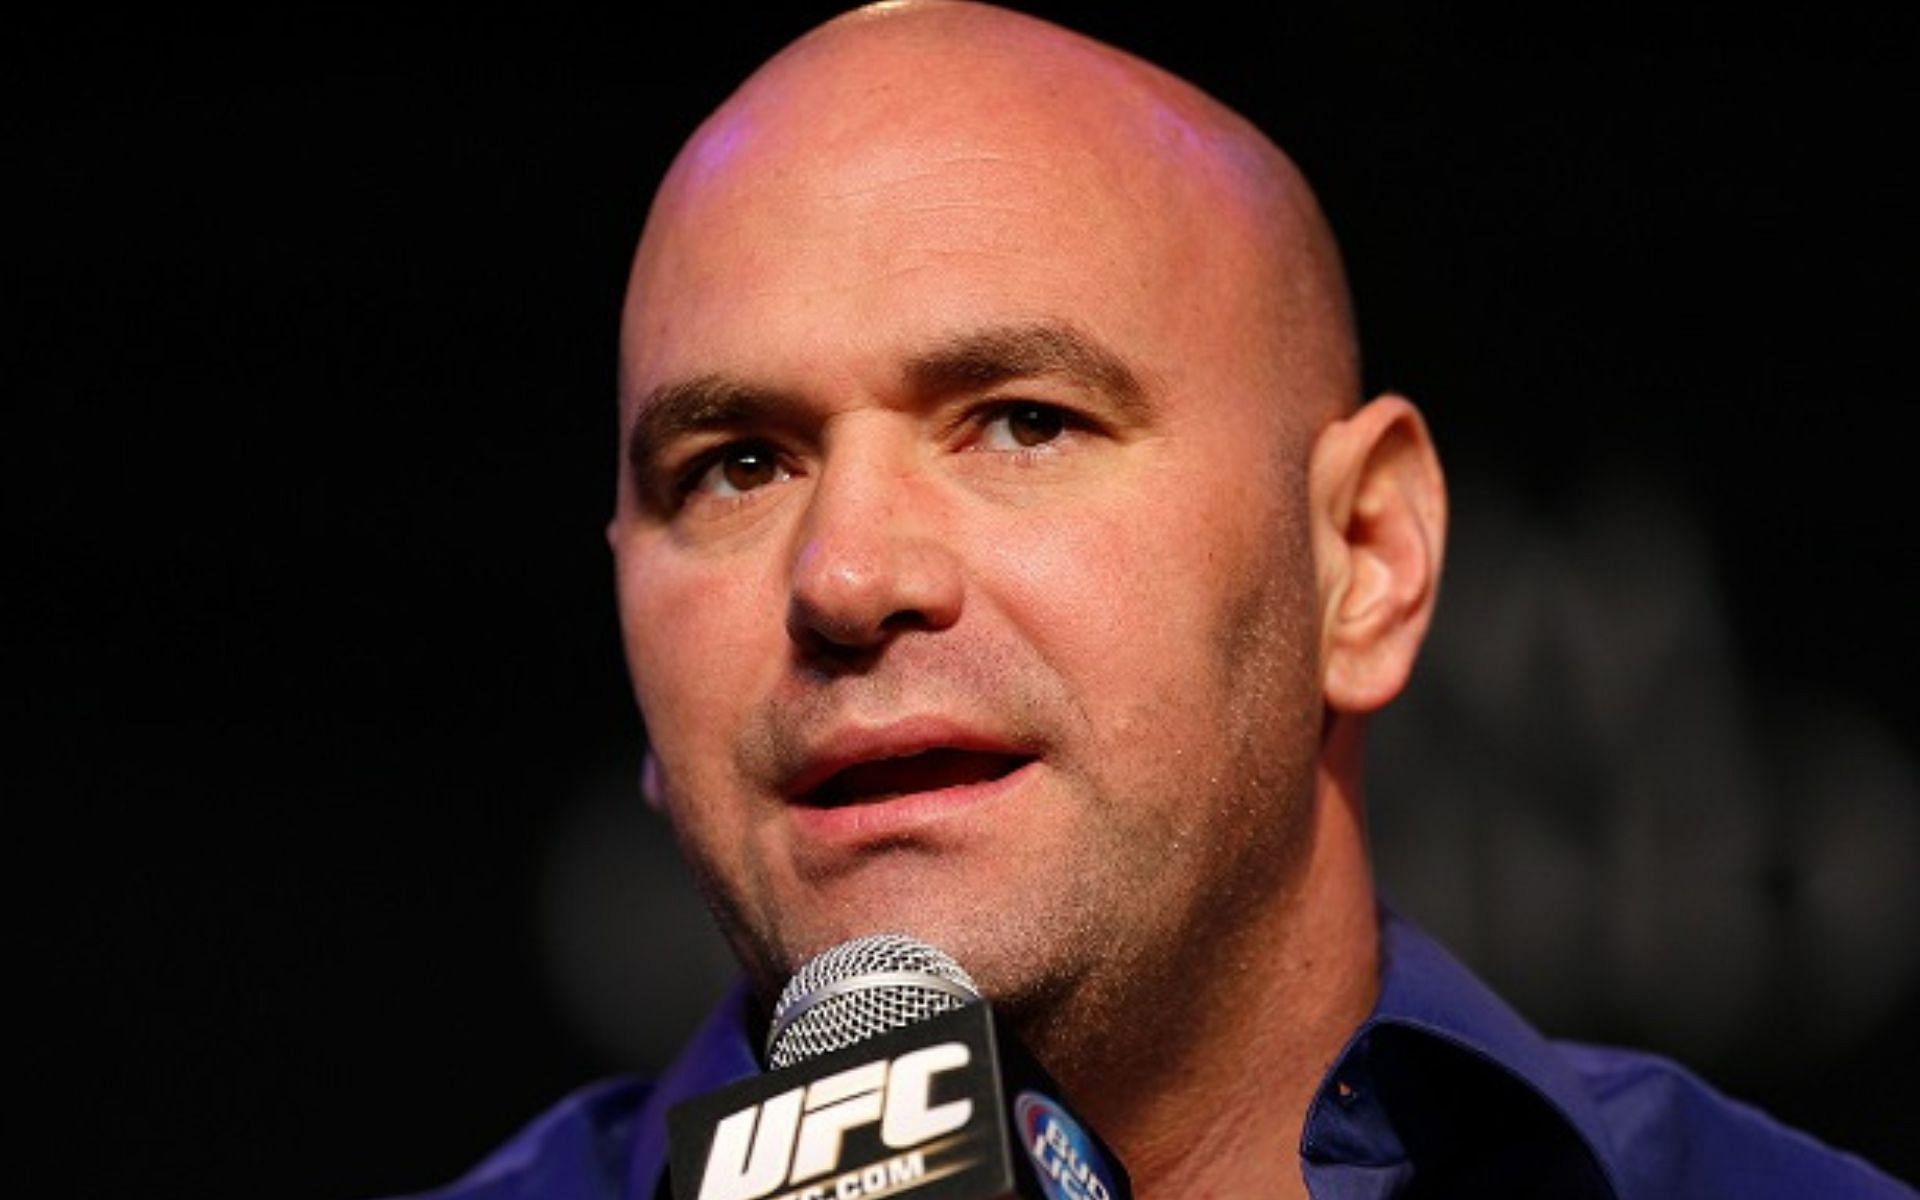 UFC President Dana White during a press conference.